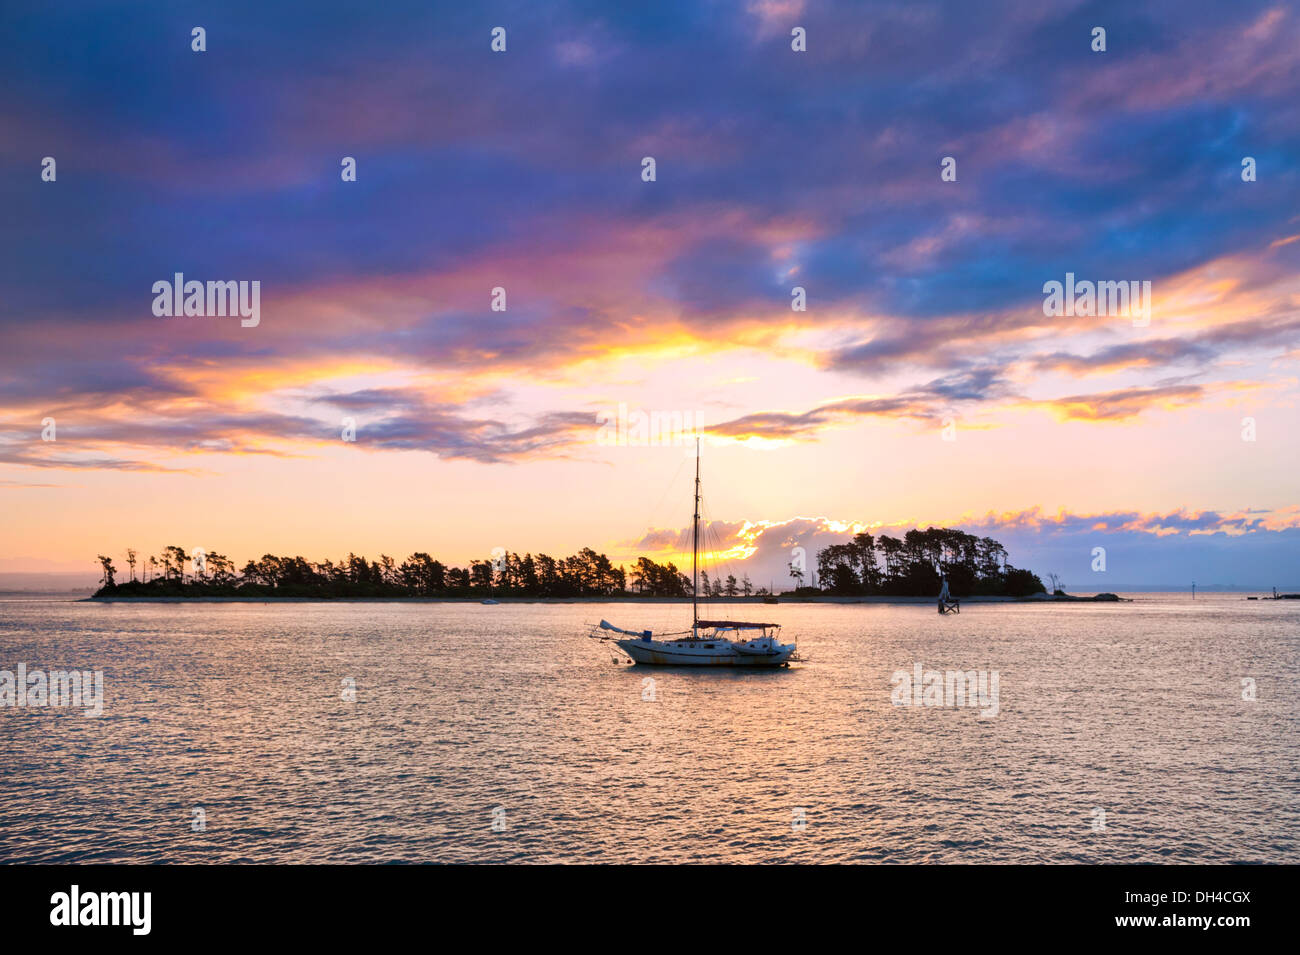 The city of Nelson, New Zealand. View from the coastline over the sea at sunset. Stock Photo